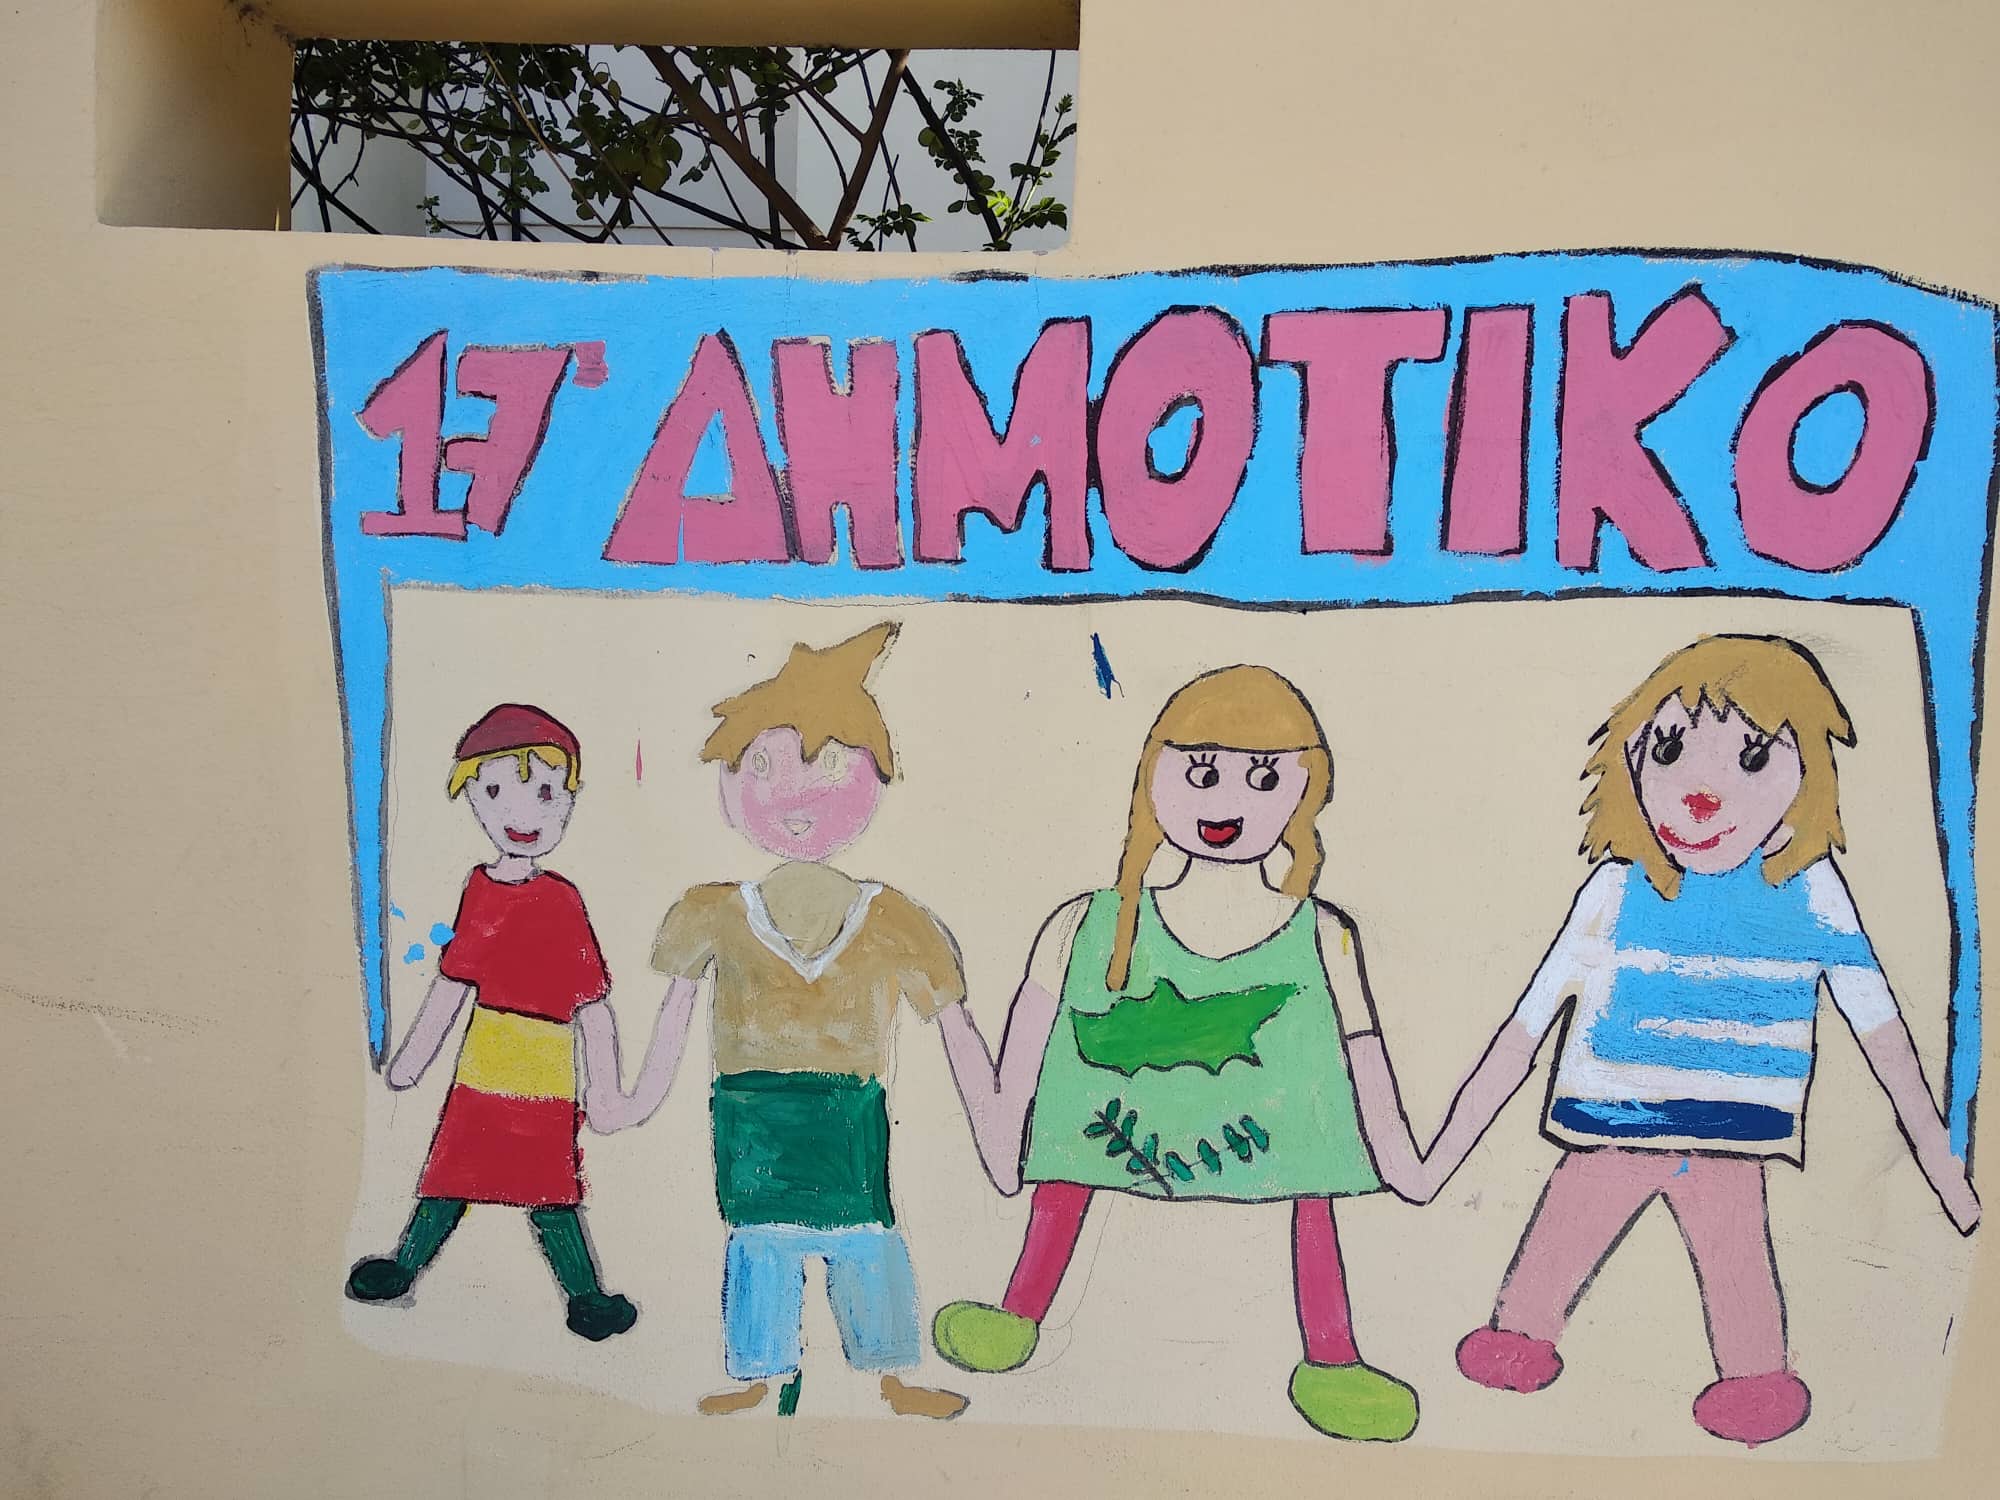 Action within the framework of Migrant and Refugee Integration Council of the Municipality of Heraklion (SEMP) - Road Culture. 